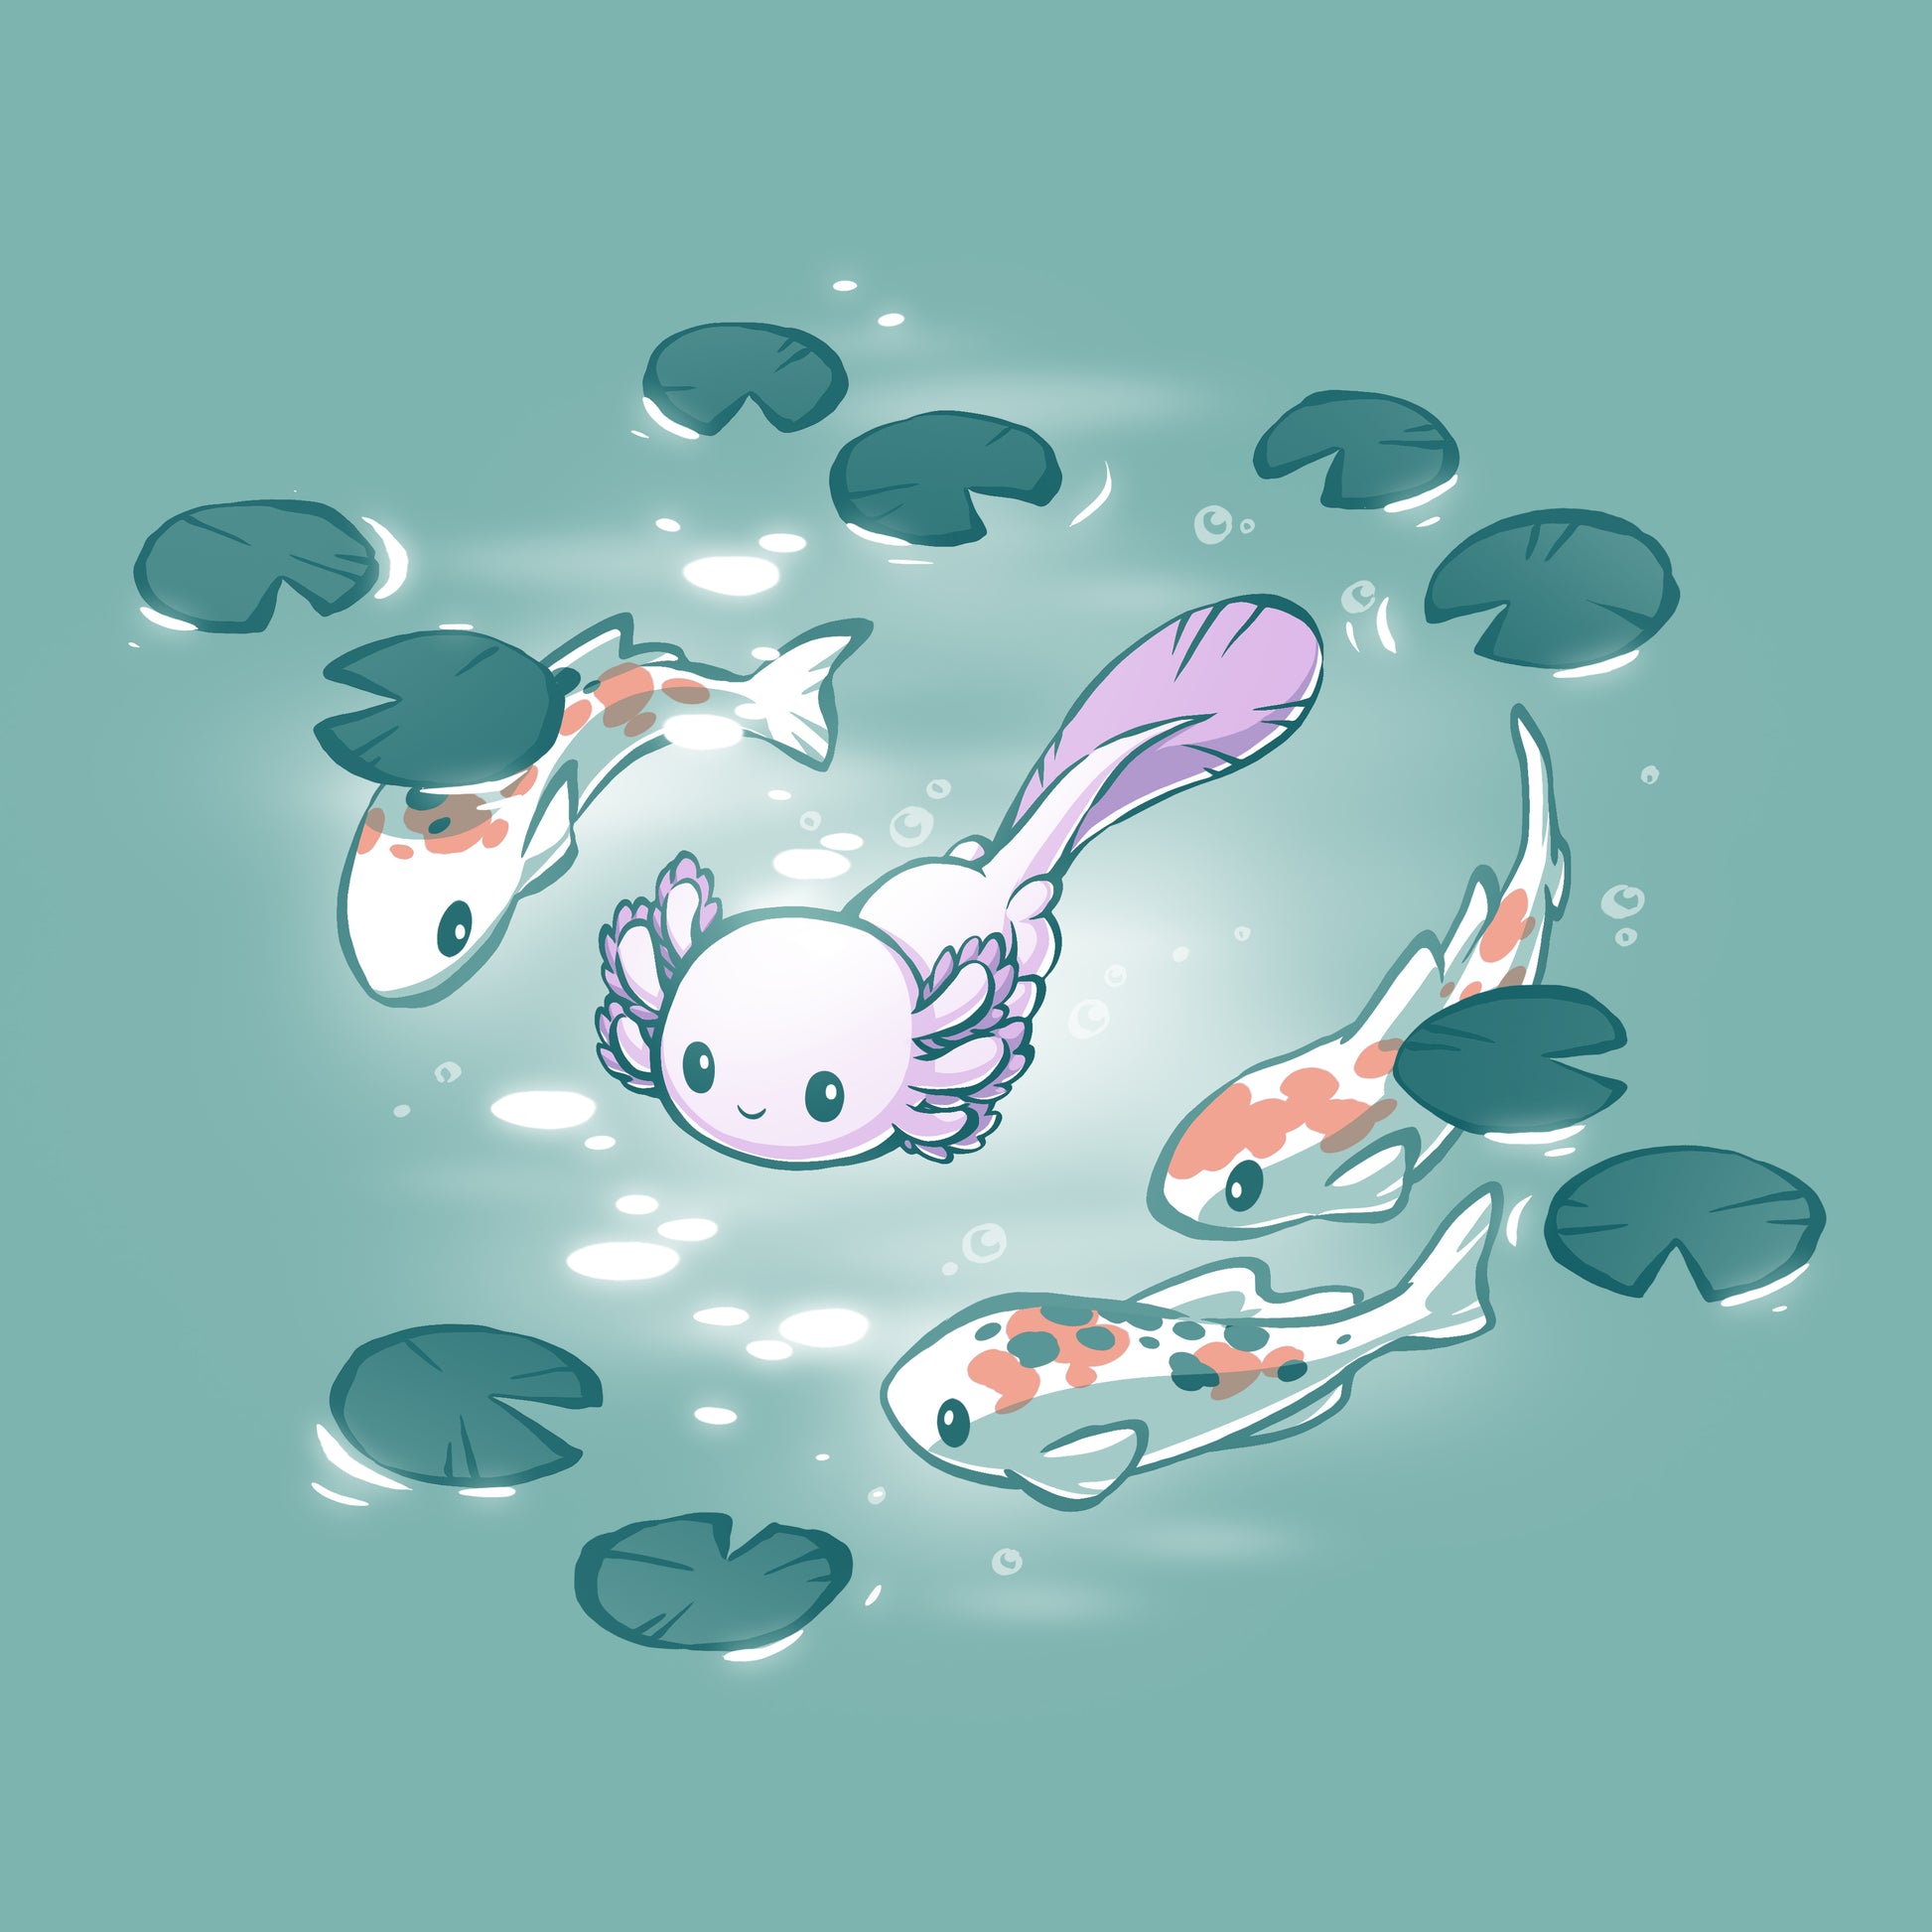 A Axolotl & Koi Friends fish swimming in a pond with lily pads, surrounded by its swimming buddies. The tranquil scene is depicted on a TeeTurtle Saltwater Green T-shirt.